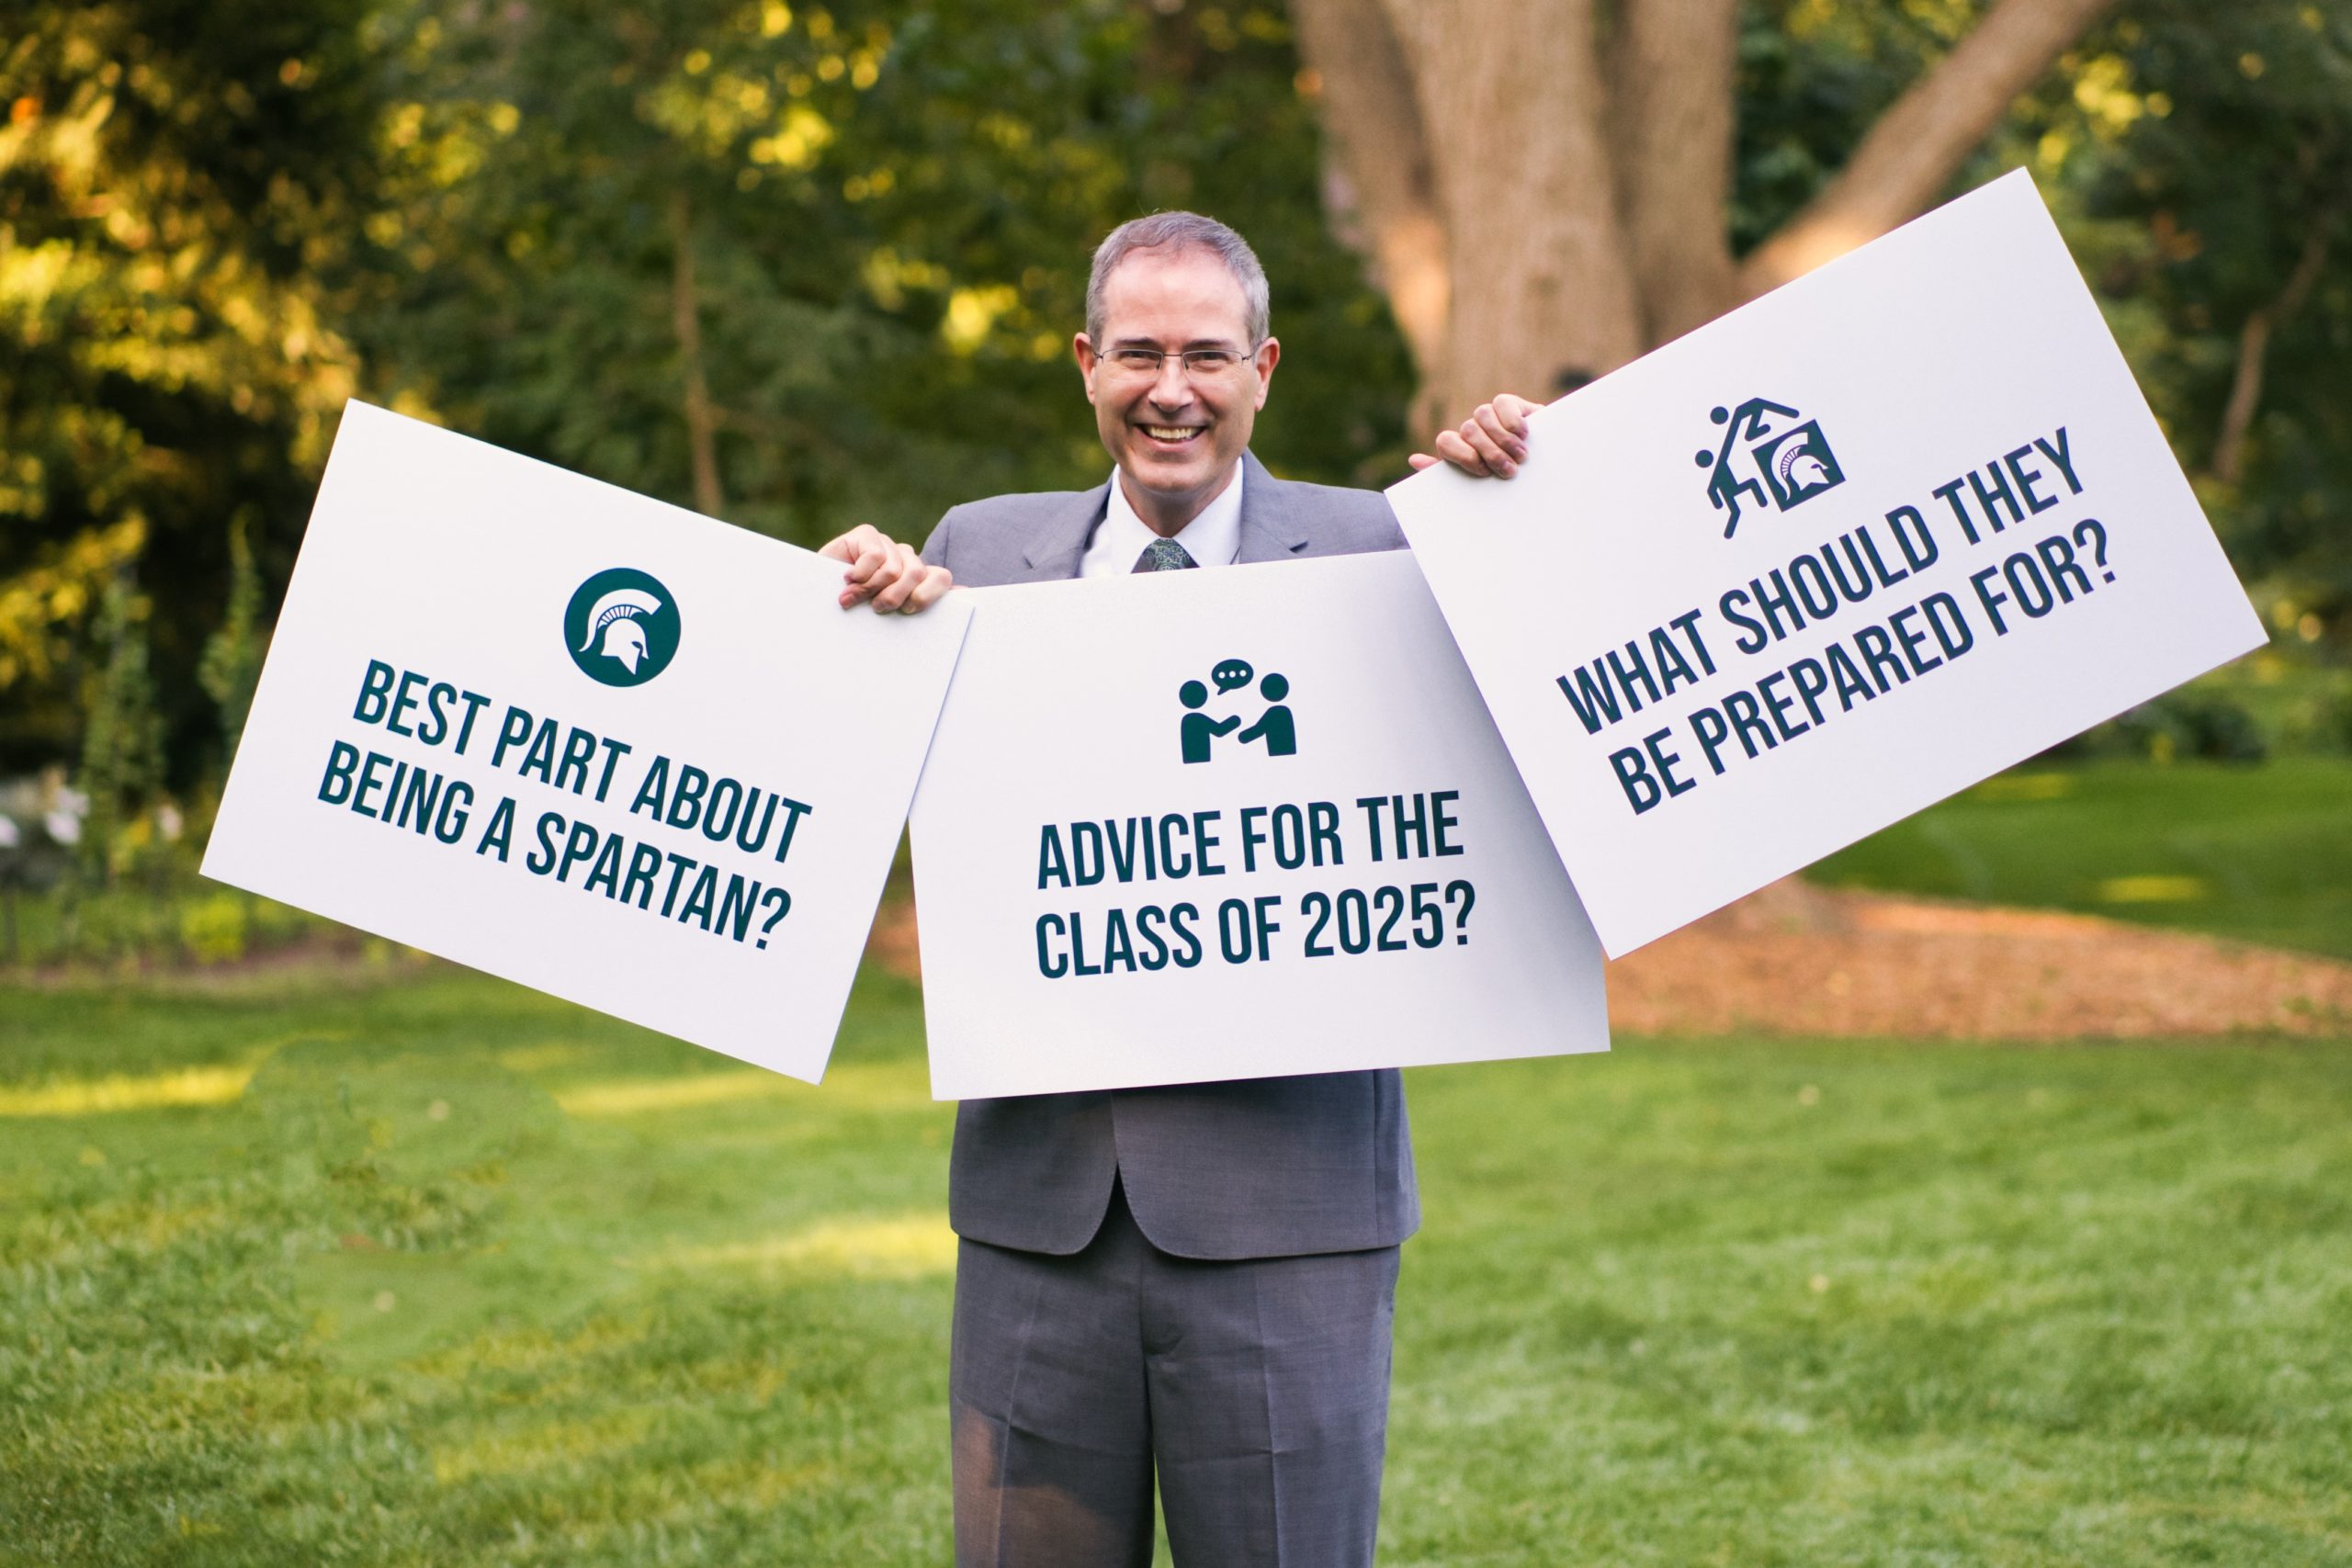 Man wearing a gray suit and holding up three white poster board signs. The text is "Best part about being a Spartan?" and "Advice for the class of 2025?" and "What should they be prepared for?"